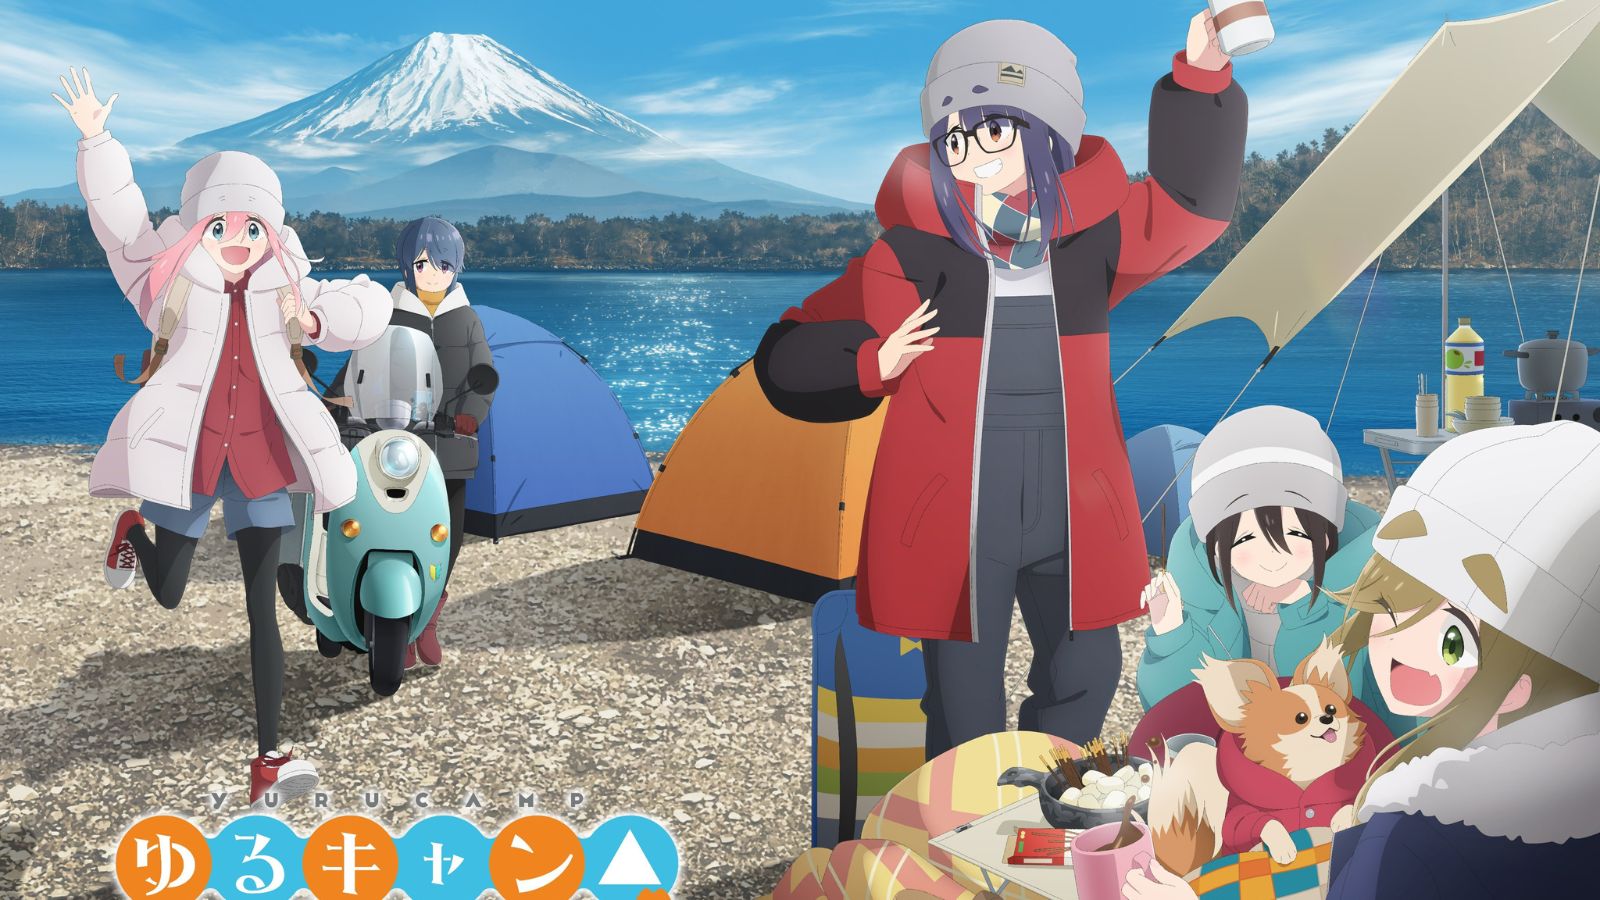 Anime Characters On Mobile Devices Pose Amidst A Wintry Forest Camping In  Asian Anime Fashion Vector, Forest, Camping, Travel PNG and Vector with  Transparent Background for Free Download